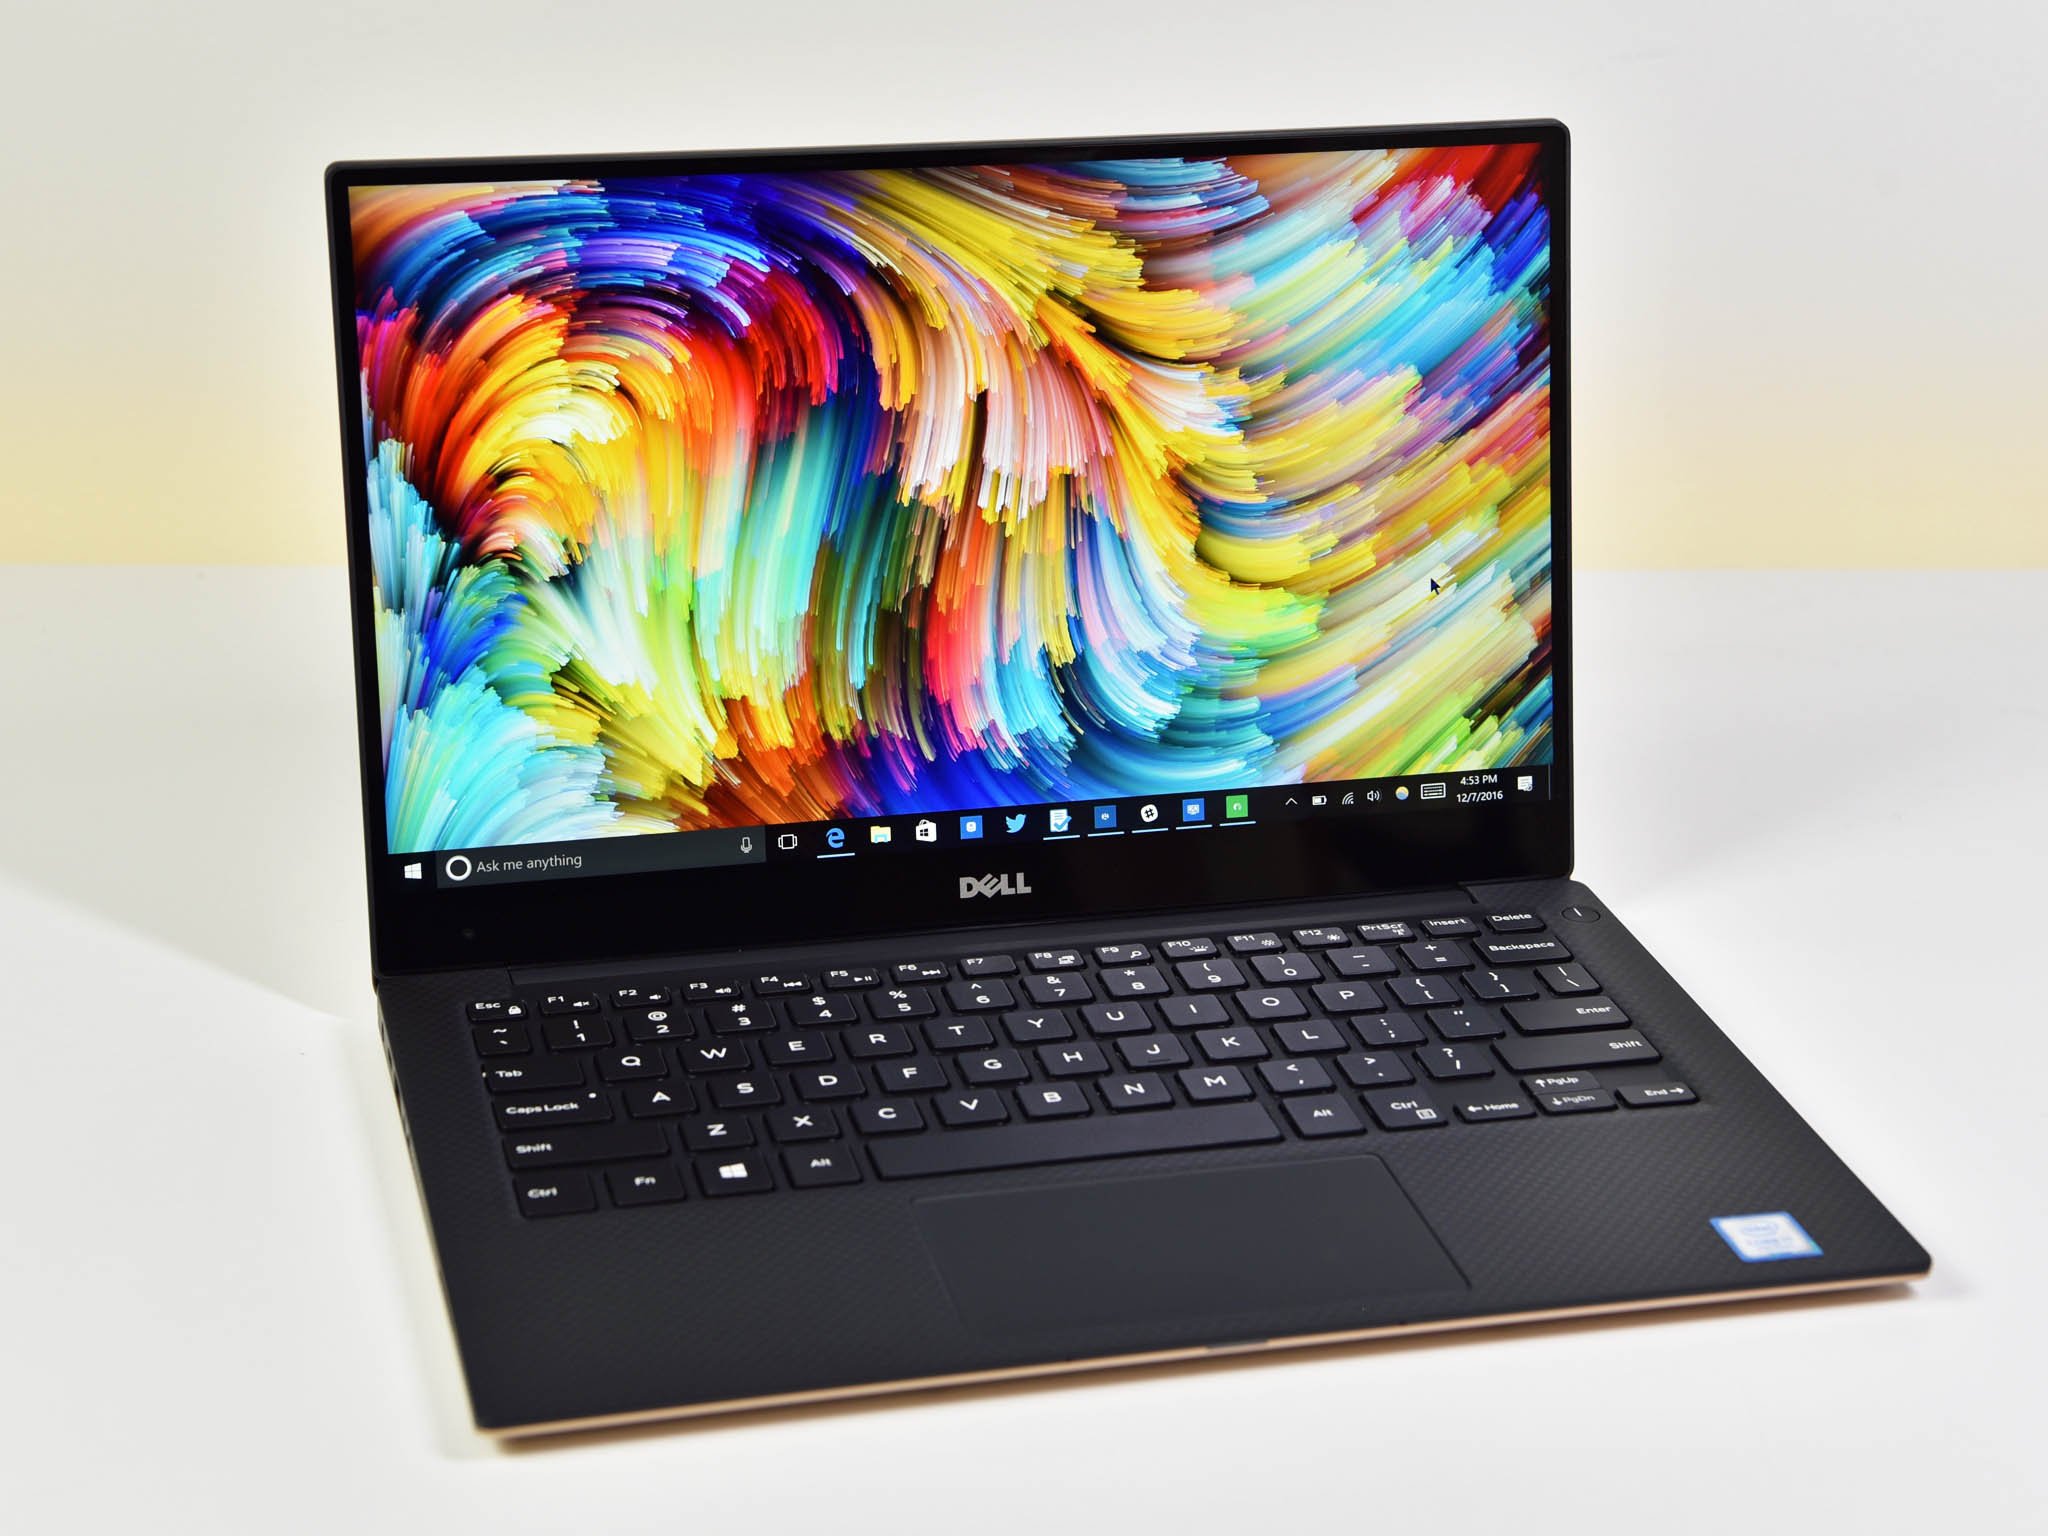 Dell XPS 13 (9360) review: A great laptop in a sea of great 